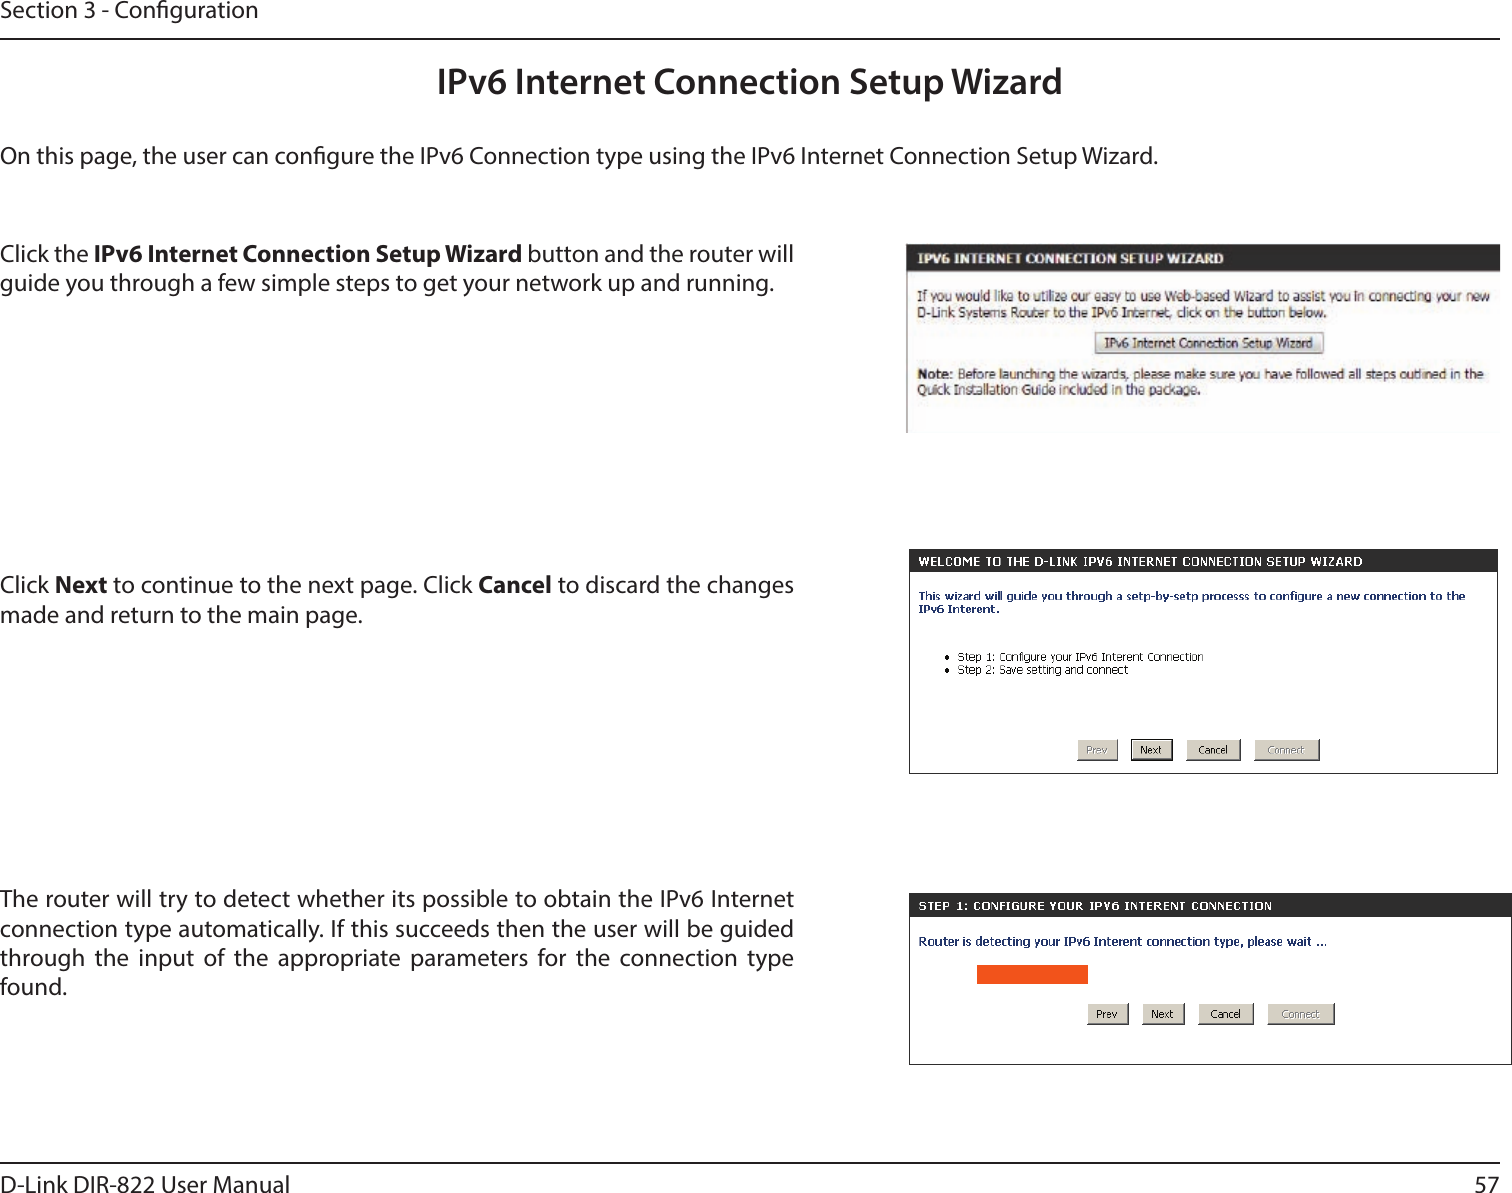 57D-Link DIR-822 User ManualSection 3 - CongurationIPv6 Internet Connection Setup WizardOn this page, the user can congure the IPv6 Connection type using the IPv6 Internet Connection Setup Wizard.Click the IPv6InternetConnectionSetupWizard button and the router will guide you through a few simple steps to get your network up and running.Click Next to continue to the next page. Click Cancel to discard the changes made and return to the main page.The router will try to detect whether its possible to obtain the IPv6 Internet connection type automatically. If this succeeds then the user will be guided through the input of the appropriate parameters for the connection type found.